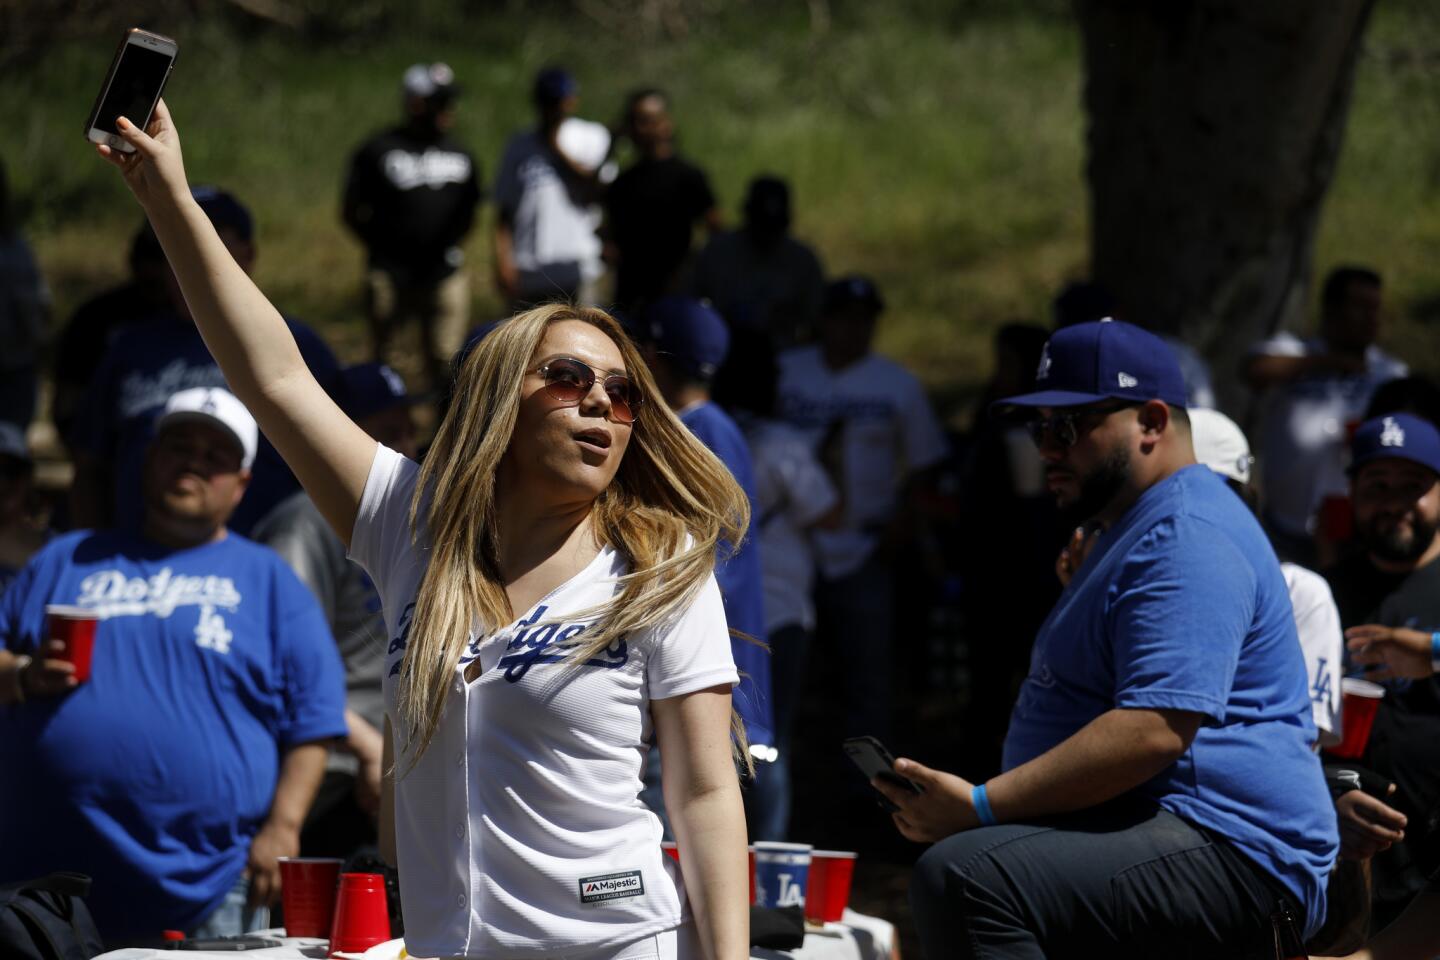 LOS ANGELES, CALIF. -- THURSDAY, MARCH 29, 2018: Melissa Enriquez, of Orange, dances to the music of Banda Tomateros de Culiacan at the Puro Pari 2018 Opening Day tailgate gathering at Elysian Park before the start of the Los Angeles Dodgers against the San Francisco Giants MLB game in Los Angeles, Calif., on March 29, 2018. (Gary Coronado / Los Angeles Times)